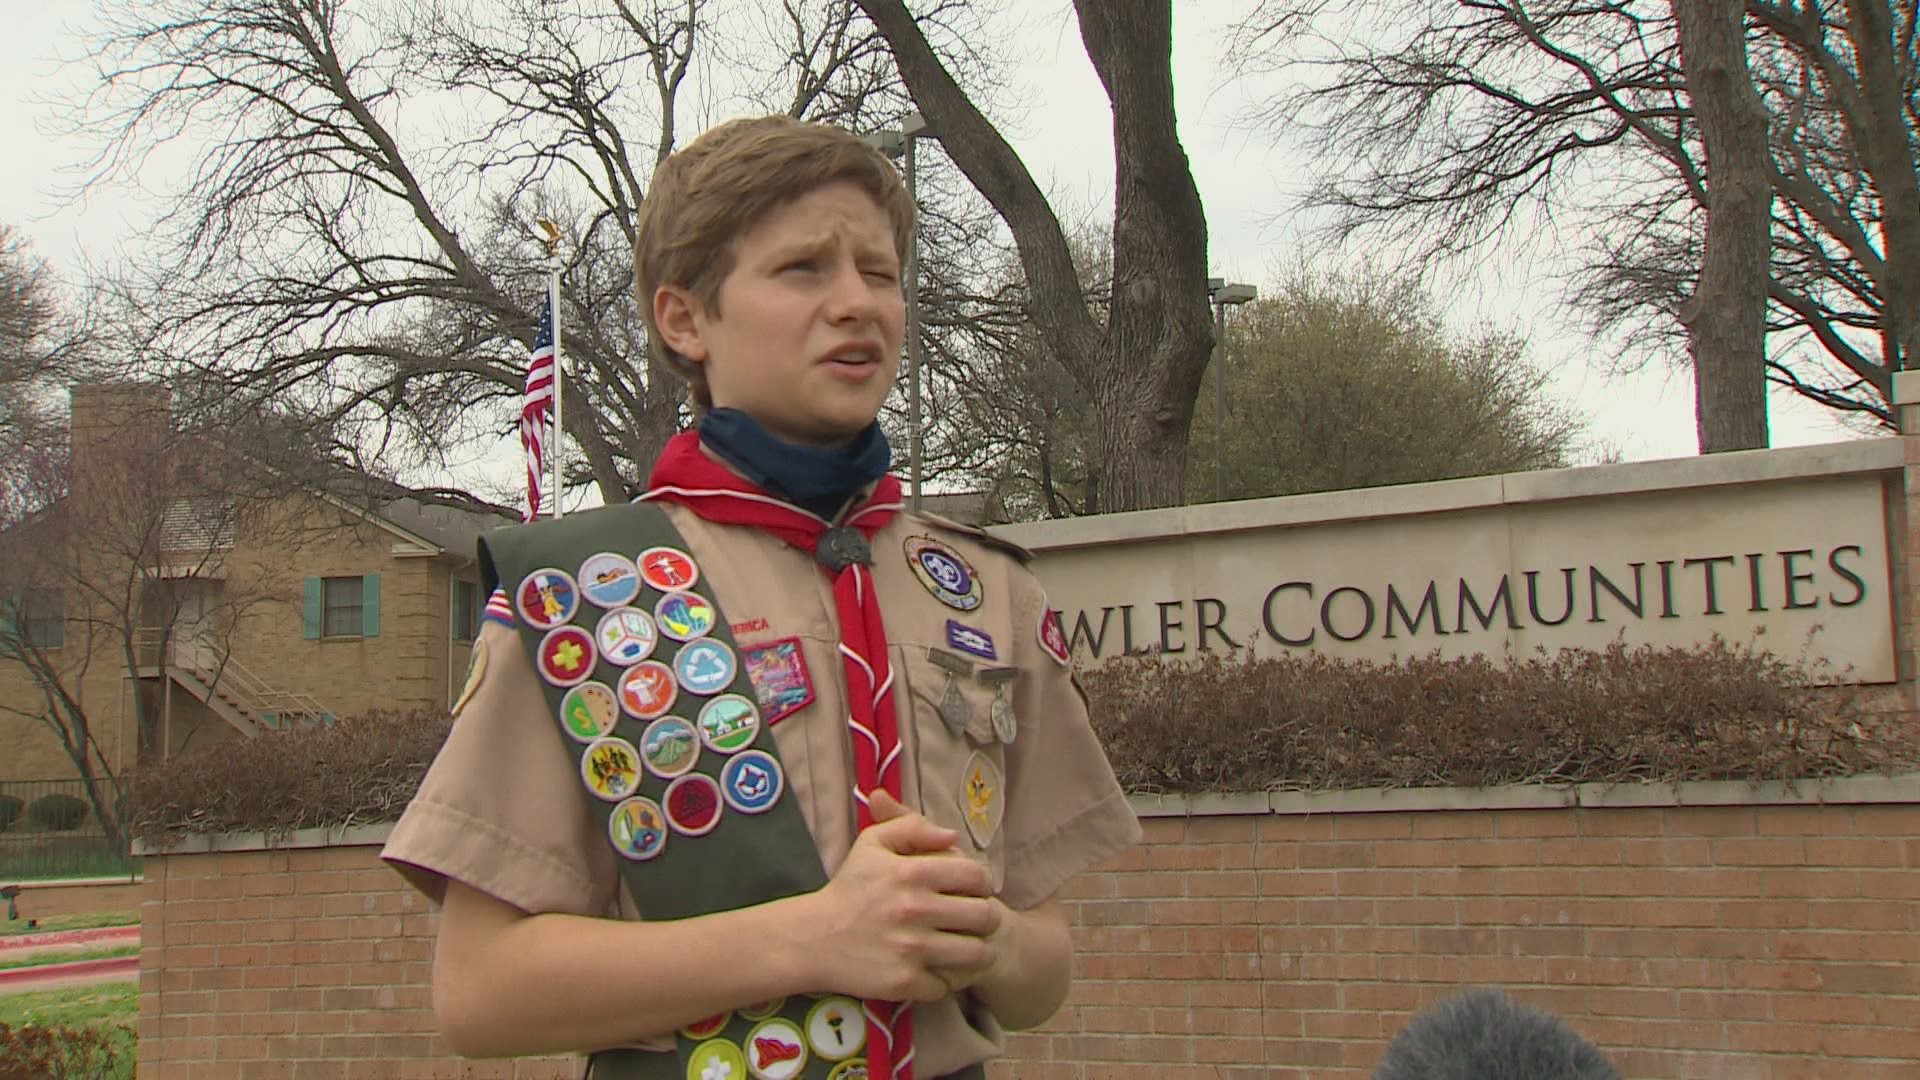 Roman Fox chose to have his Eagle Scout flag-raising ceremony at the Juliette Fowler Communities, an apartment complex that helps older people in Dallas.